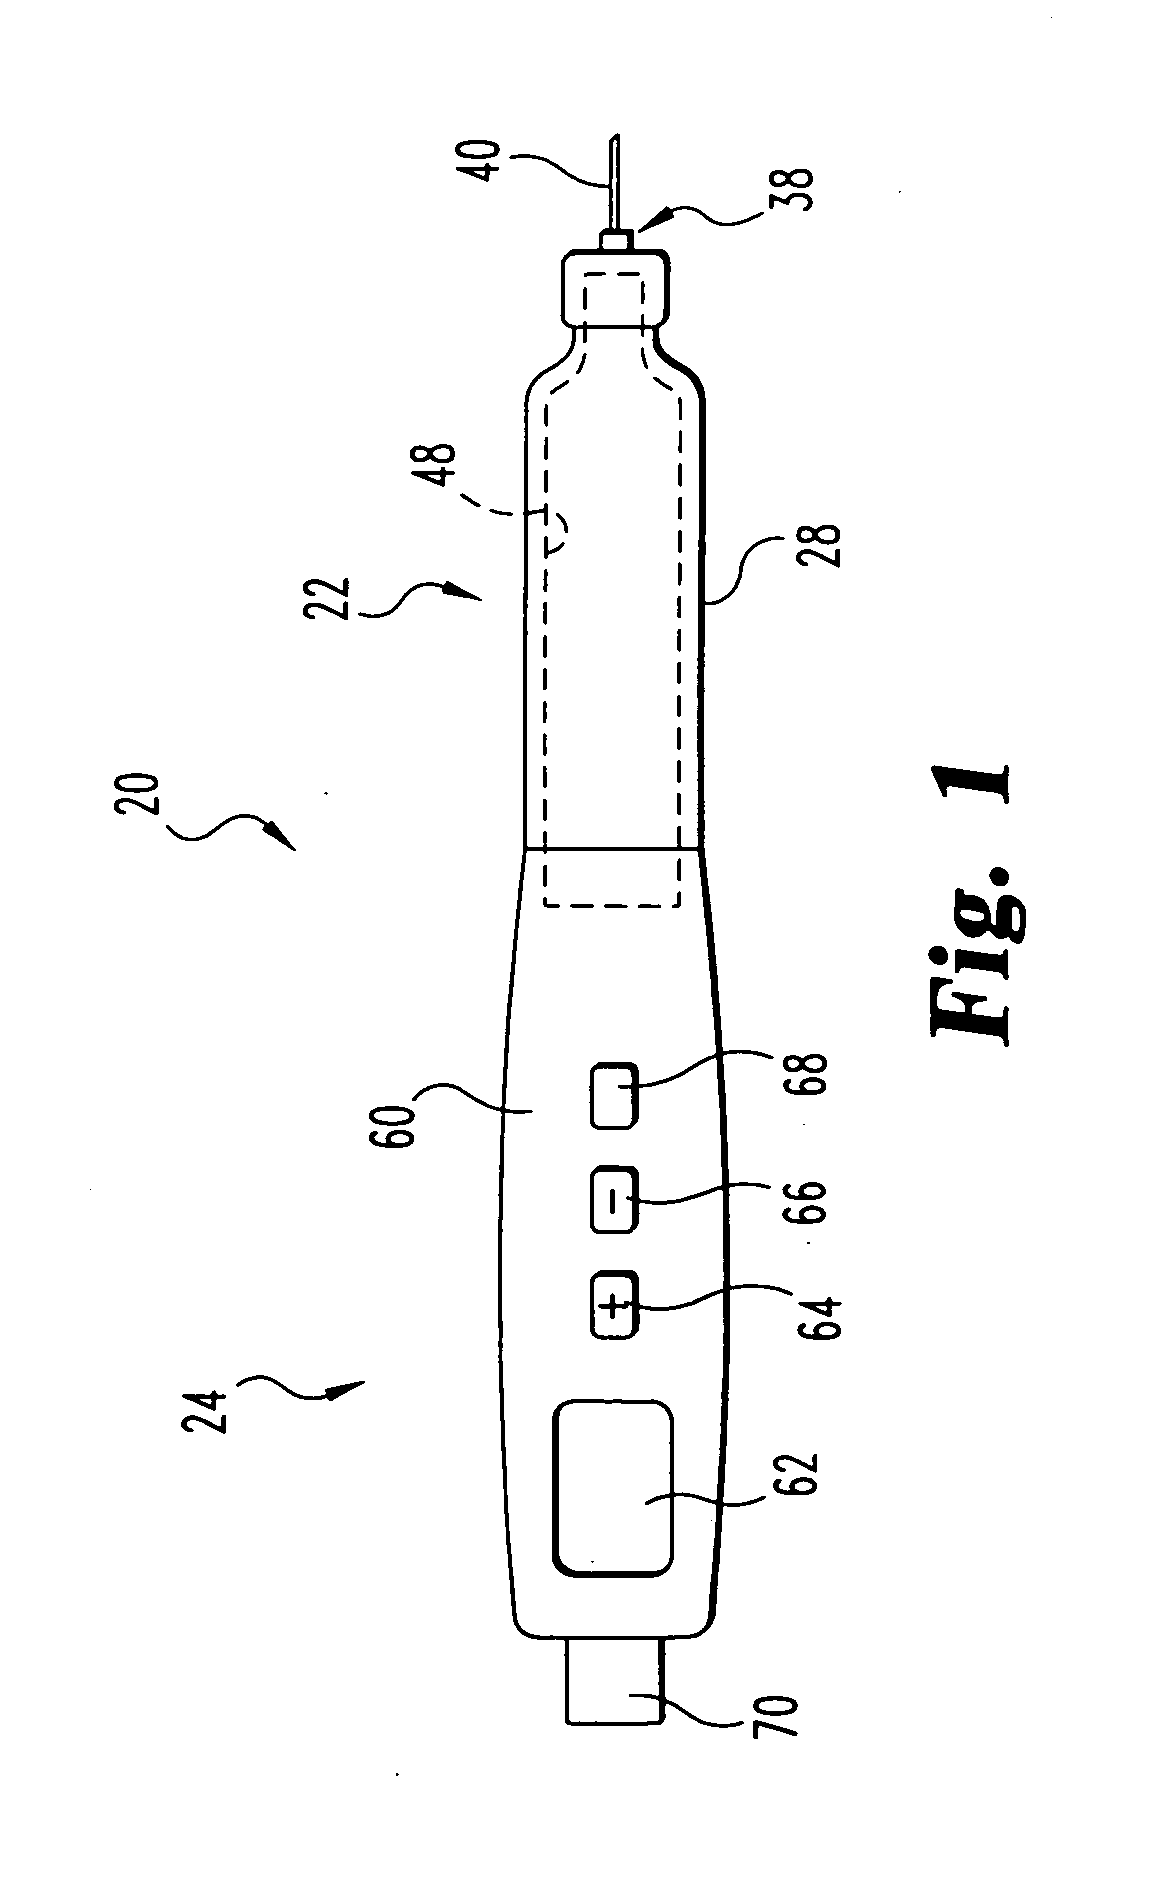 Medication injecting apparatus with fluid container piston-engaging drive member having internal hollow for accommodating drive member shifting mechanism